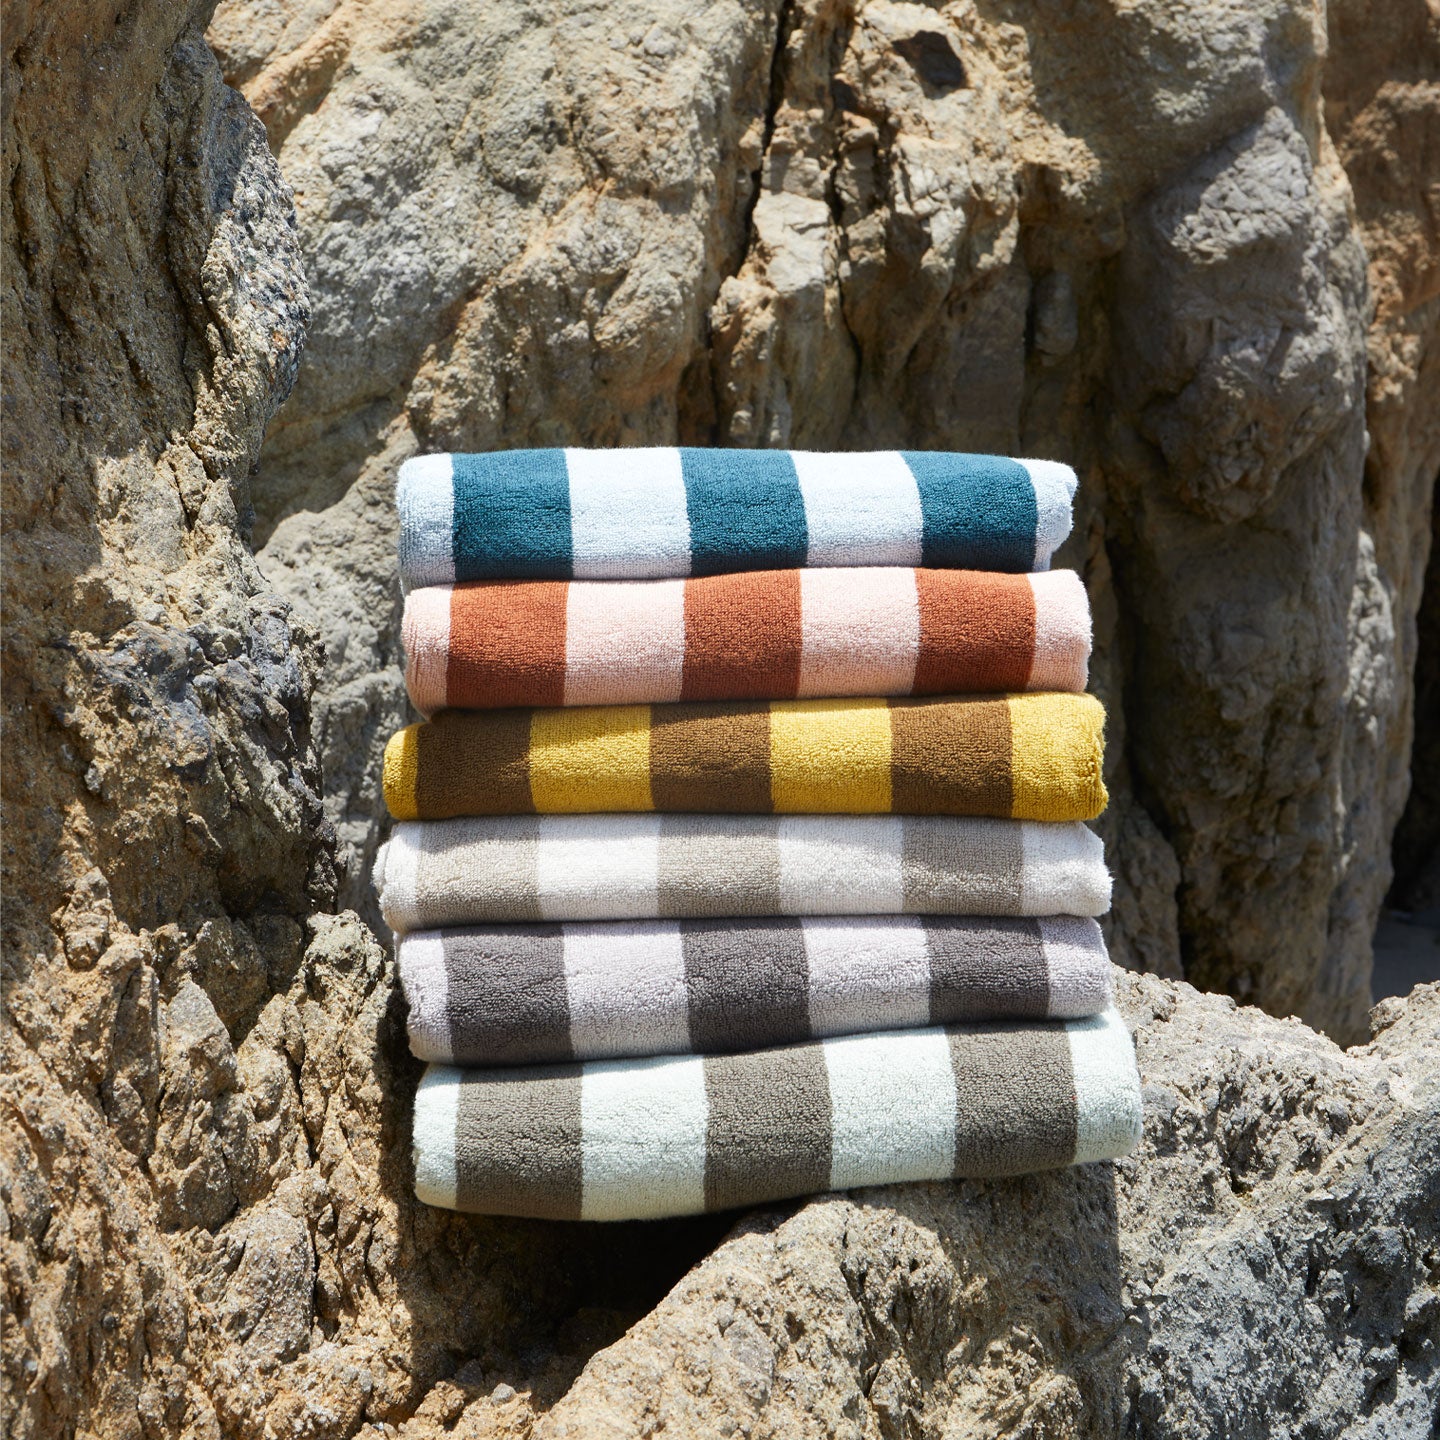 A stack of striped terry towels in six colors on a rock formation.